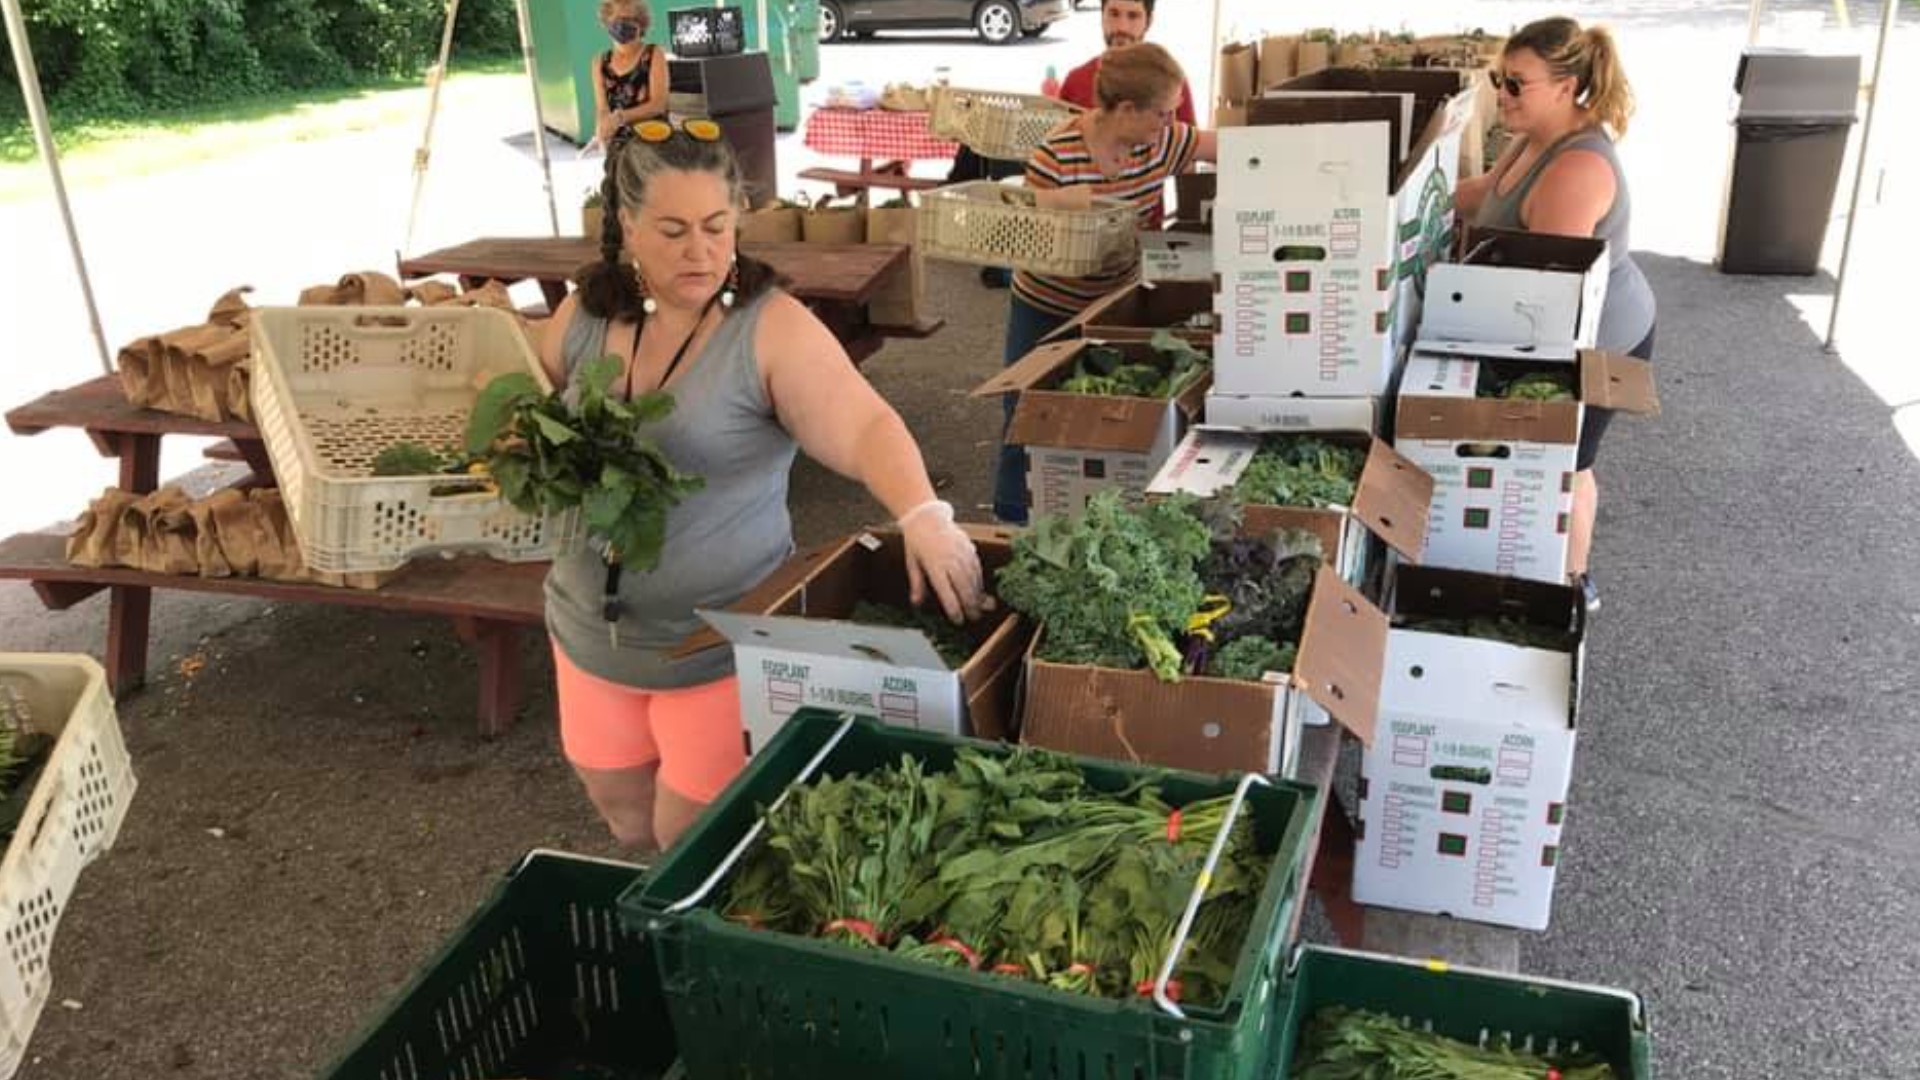 The farm-to-table movement takes food from local farmers and passes them onto families. The organization also stresses healthy eating.